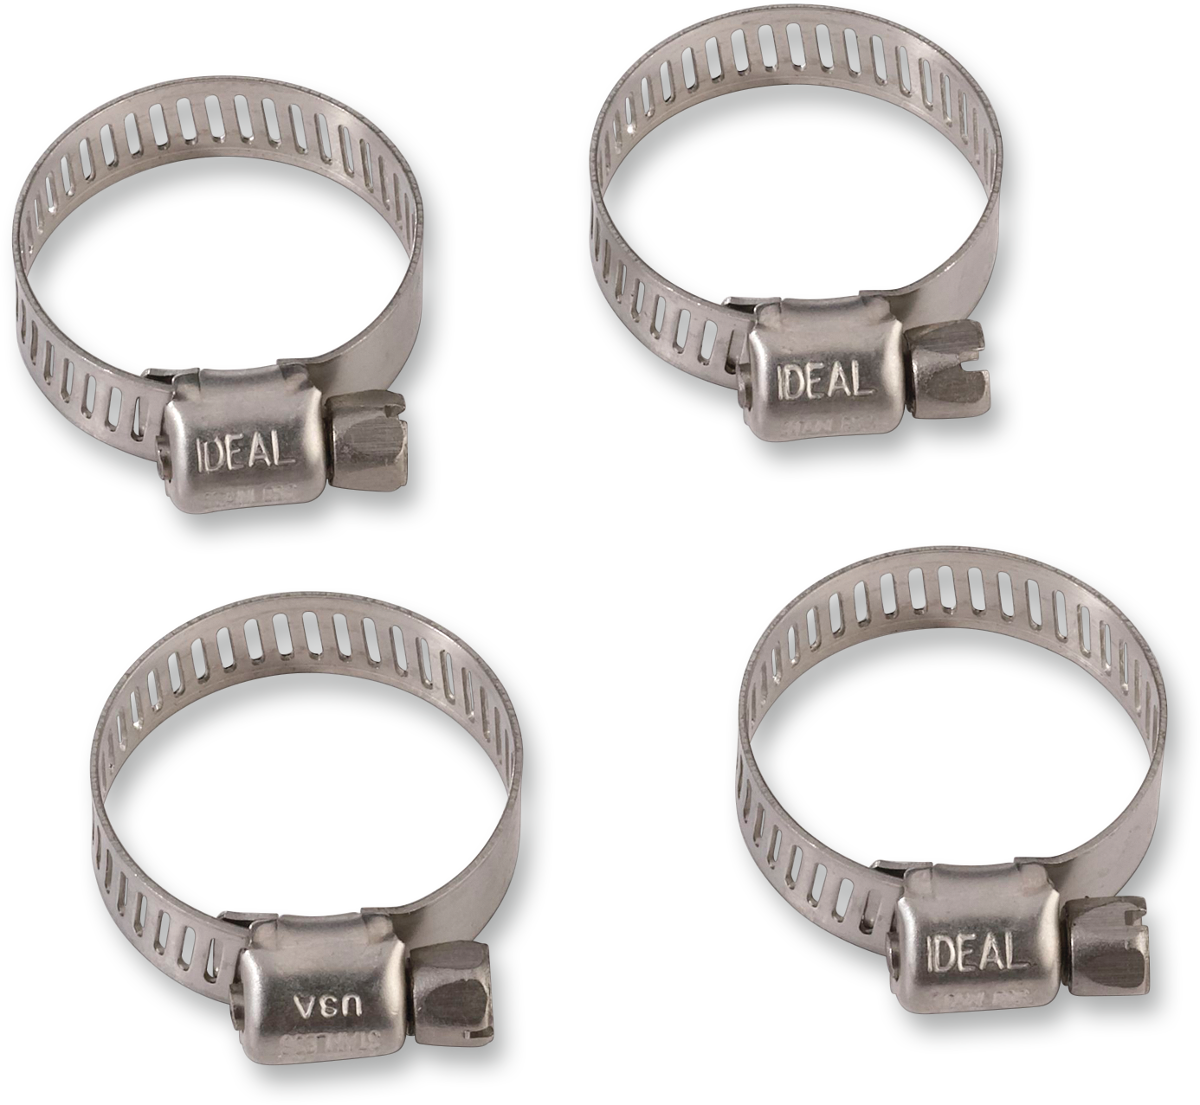 MOOSE RACING HARD-PARTS GEAR DRIVE HOSE CLAMPS CLAMP HOSE SS 13-38MM 4PK